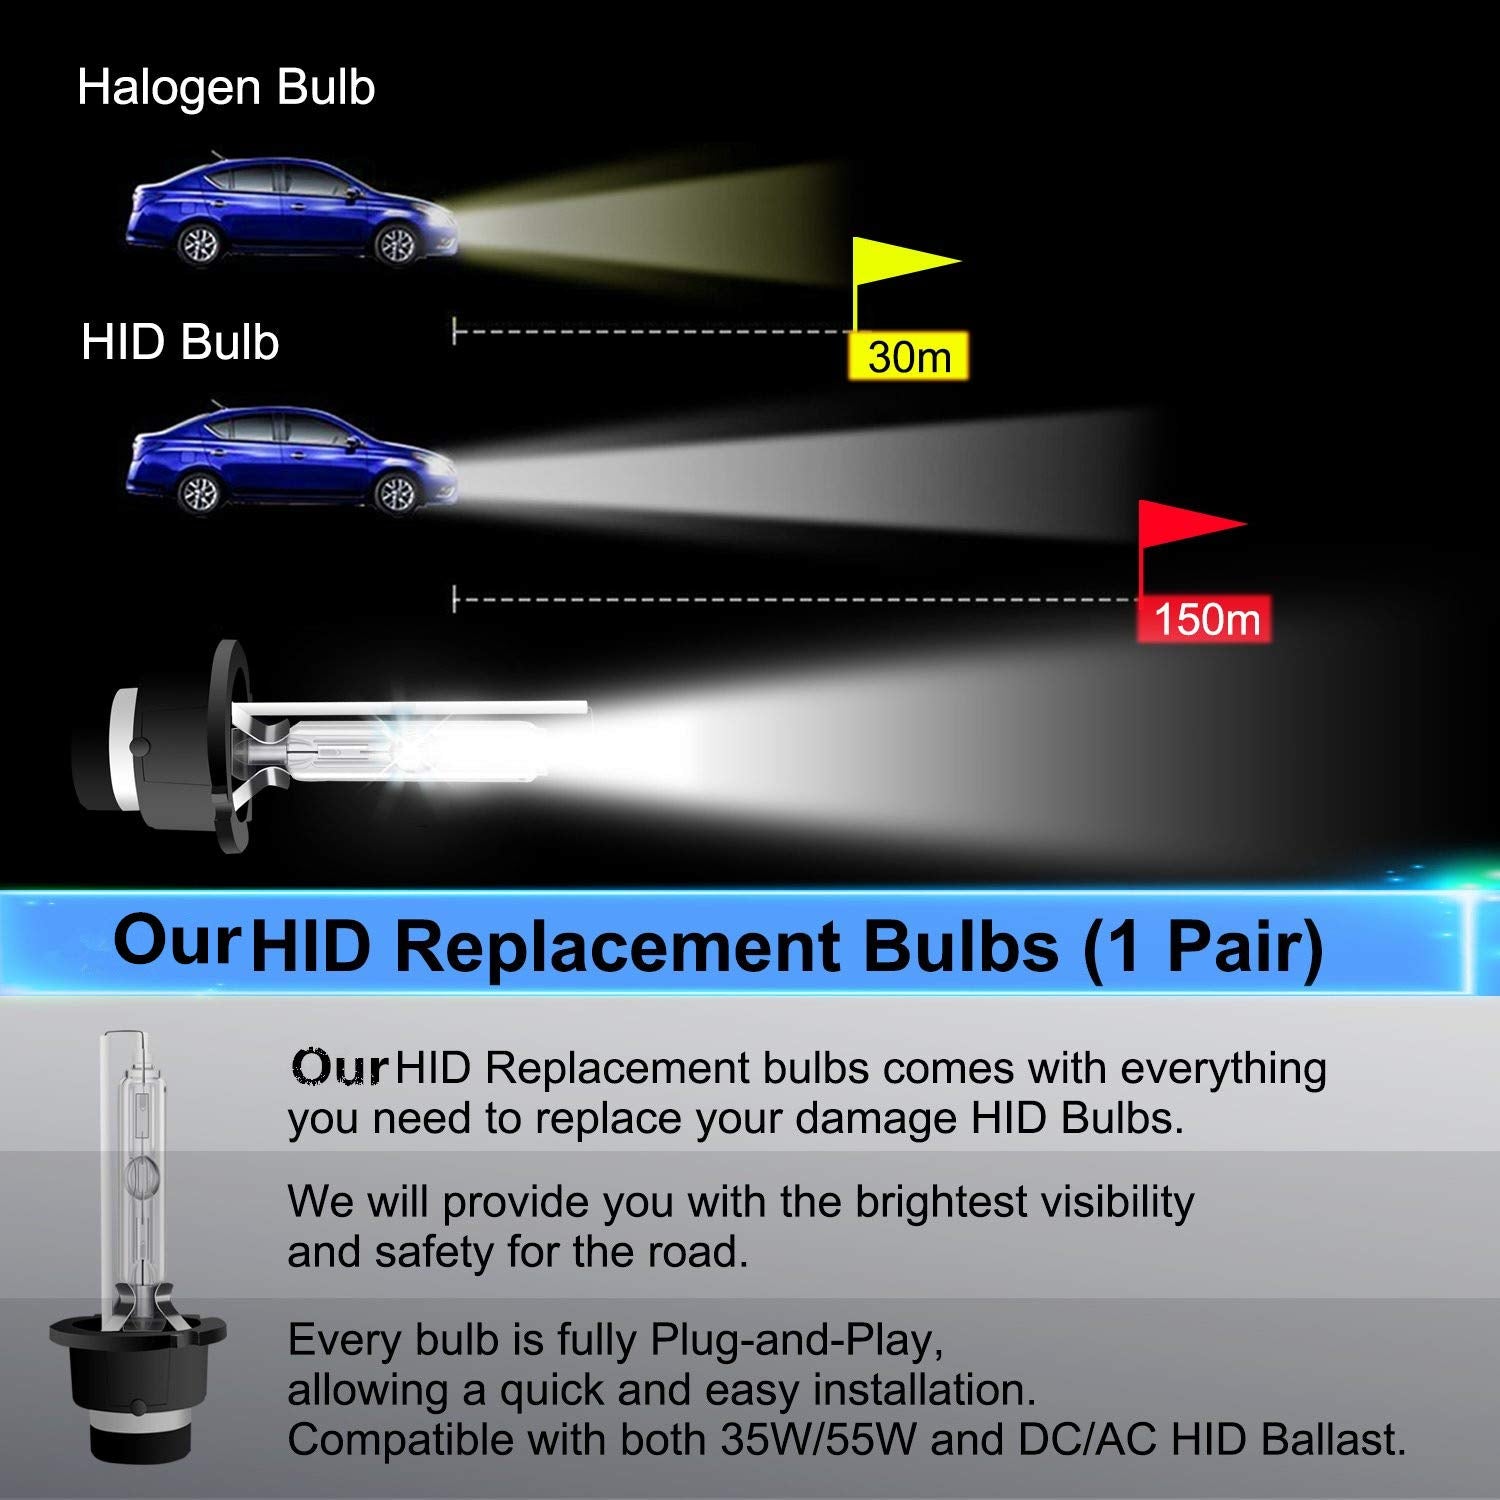 HID Bulb Replacement